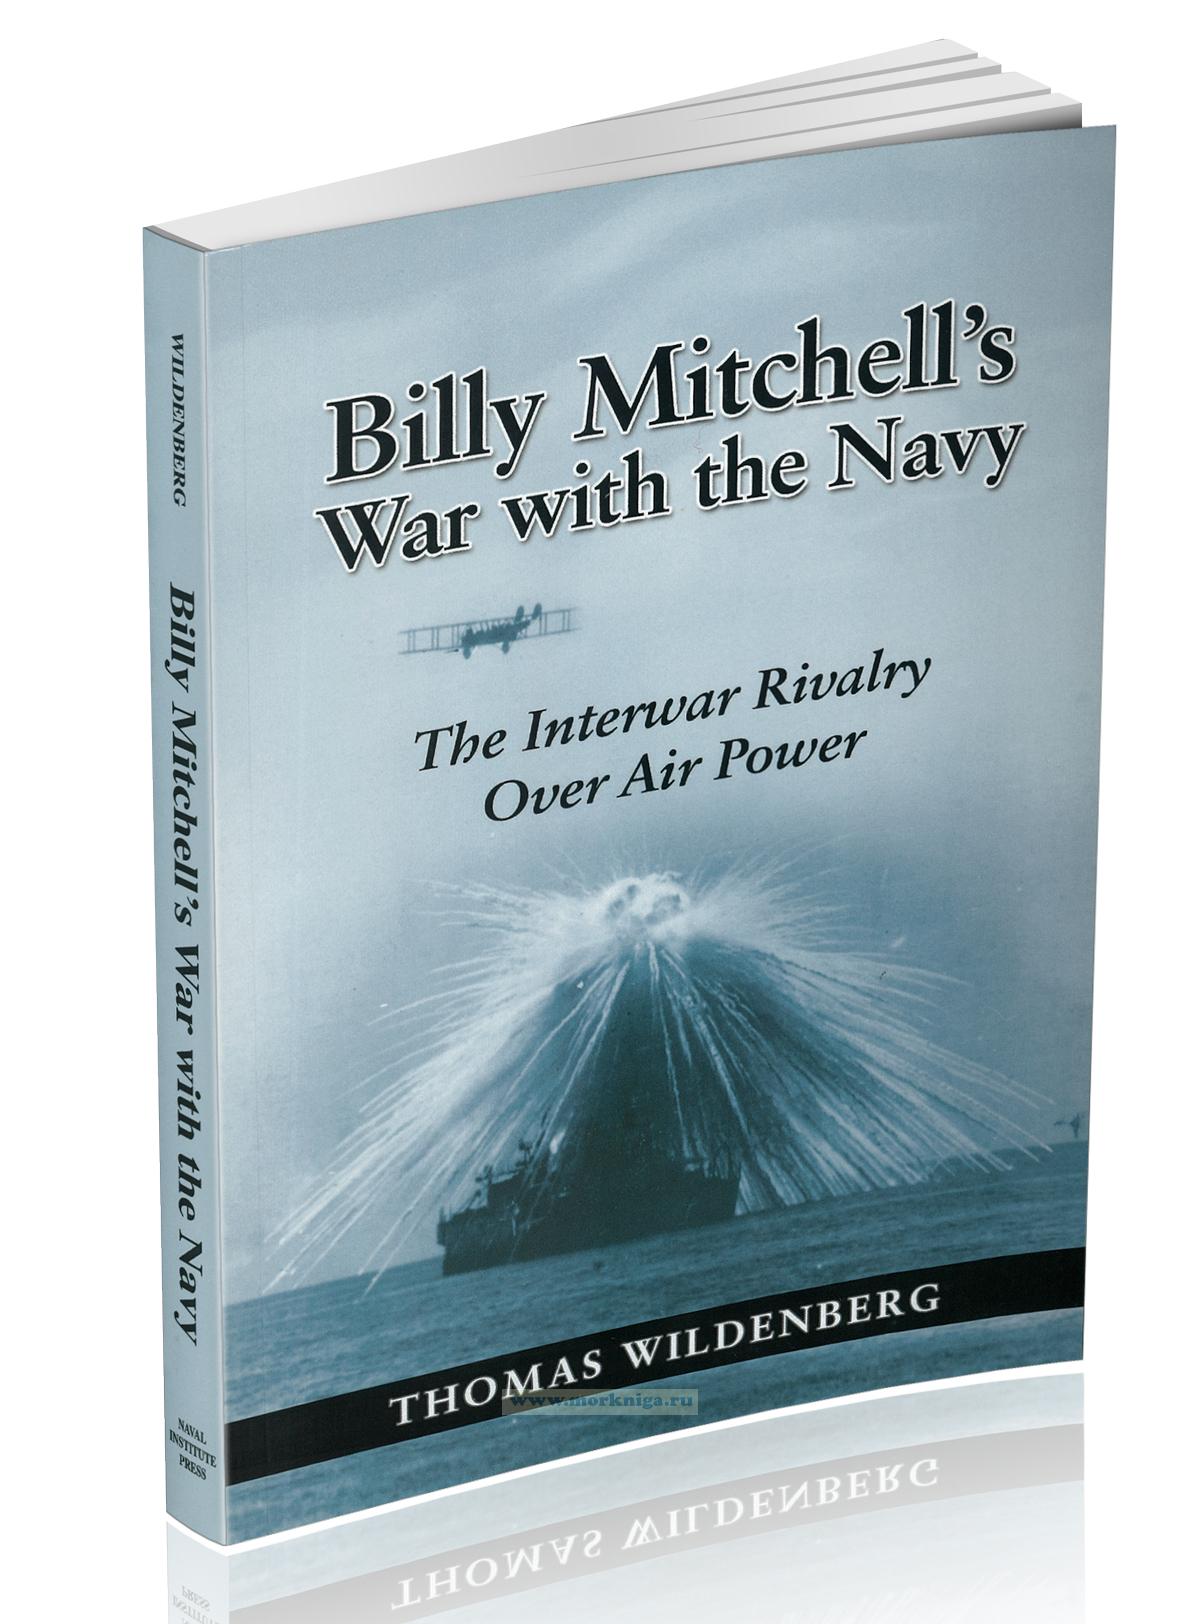 Billy Mitchell's War with the Navy. The Interwar Rivalry Over Air Power